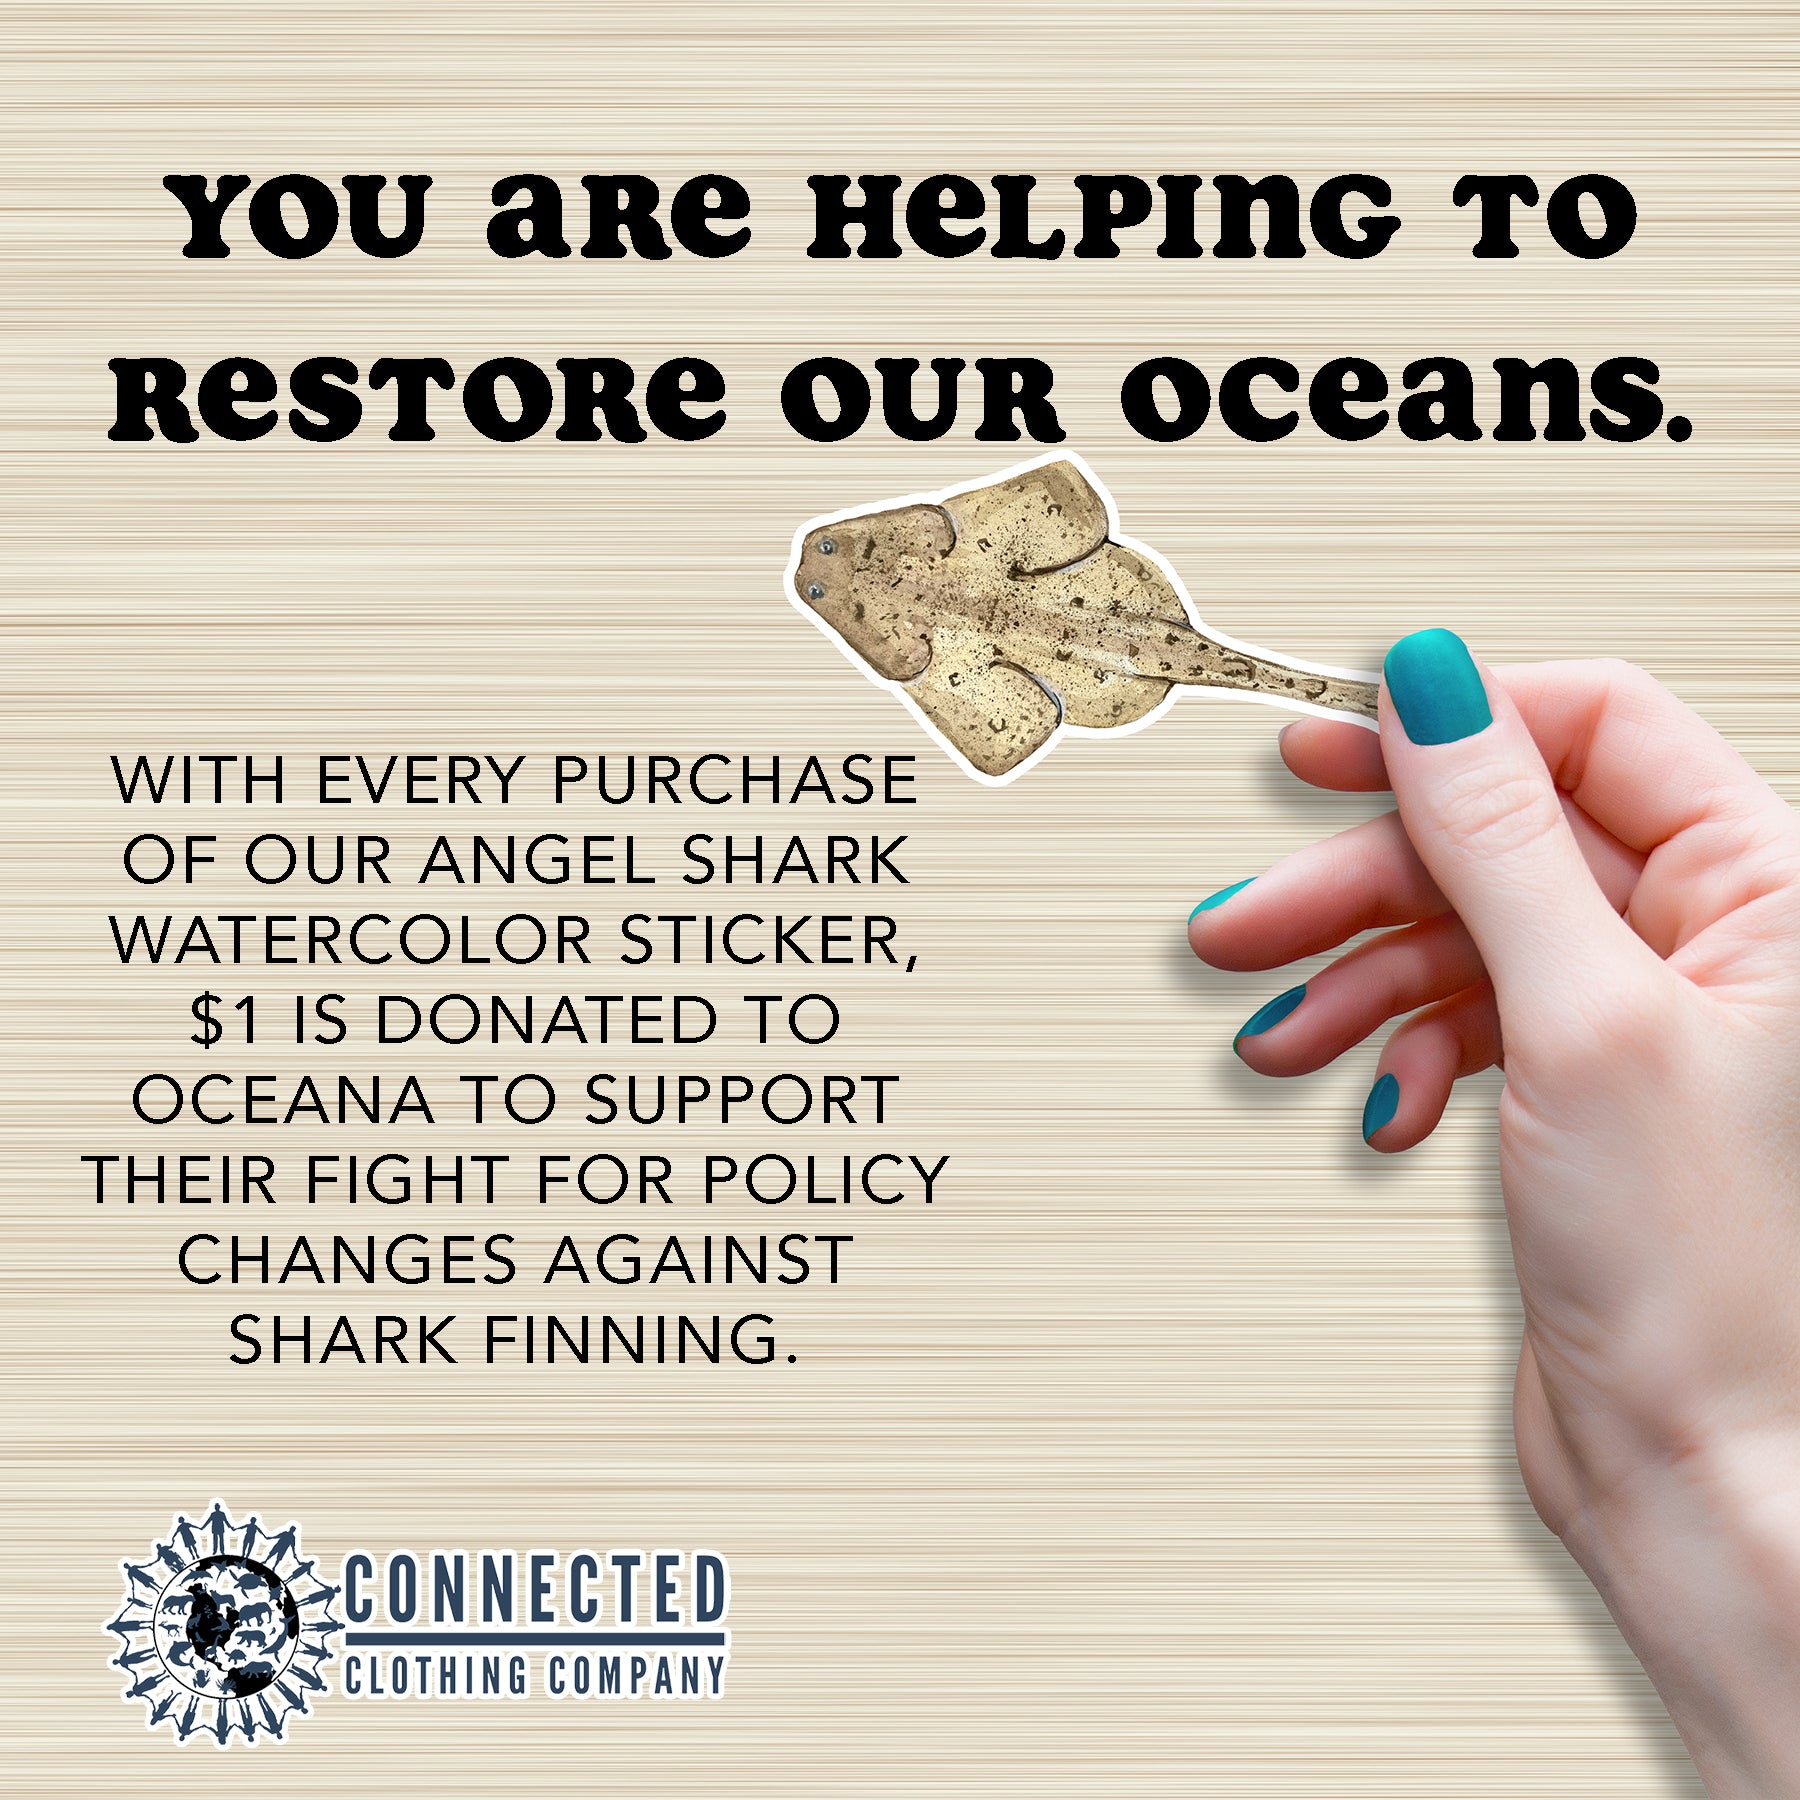 Hand Holding Angel Shark Watercolor Sticker - "You are helping to restore our oceans. With every purchase of our angel shark watercolor sticker, $1 is donated to oceana to support their fight for policy changes against shark finning." - sweetsherriloudesigns - Ethical and Sustainable Apparel - portion of profits donated to shark conservation